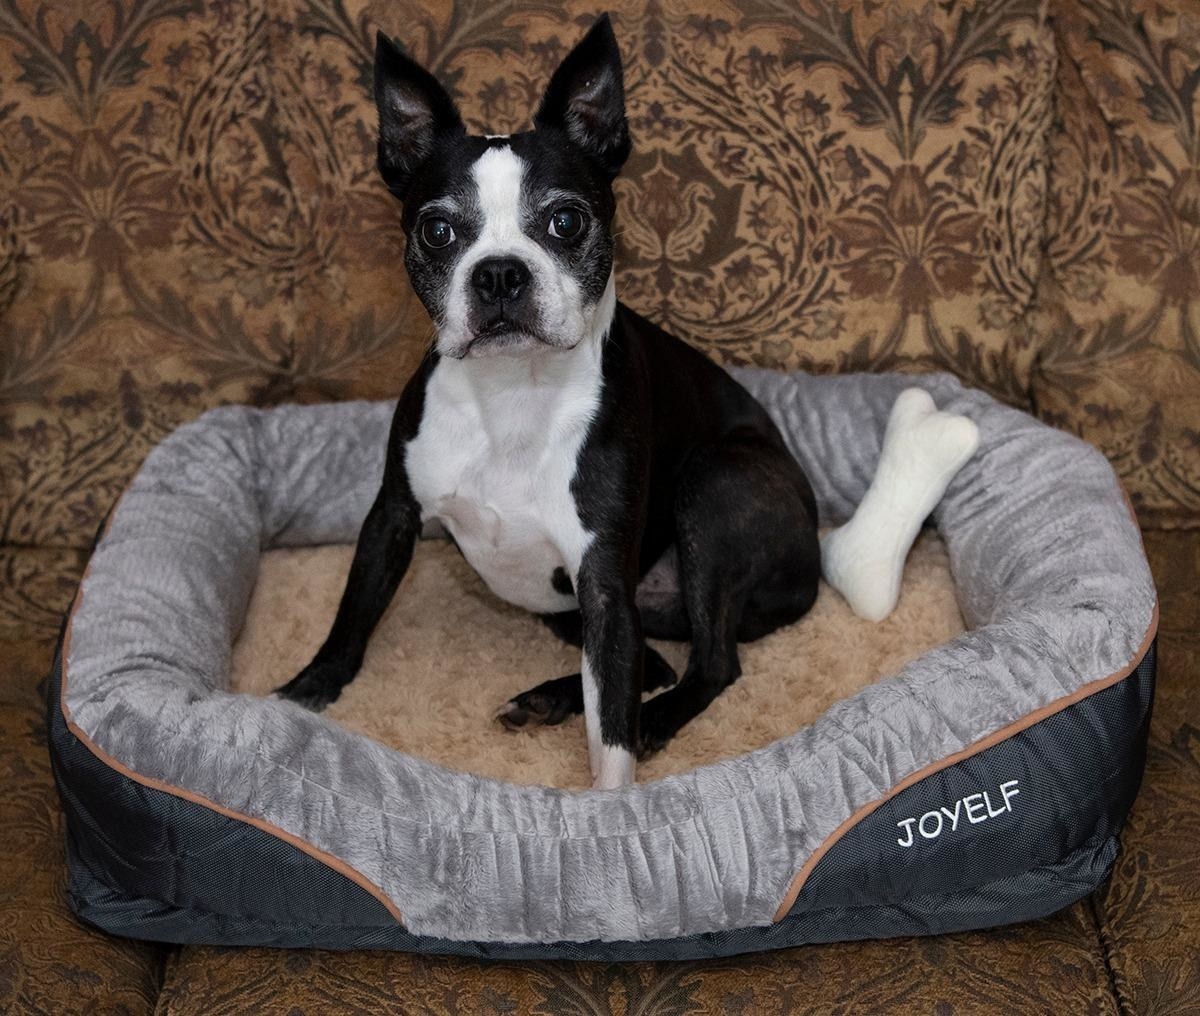 JOYELF Medium Memory Foam Dog Bed Replacement Cover for 31 x 22